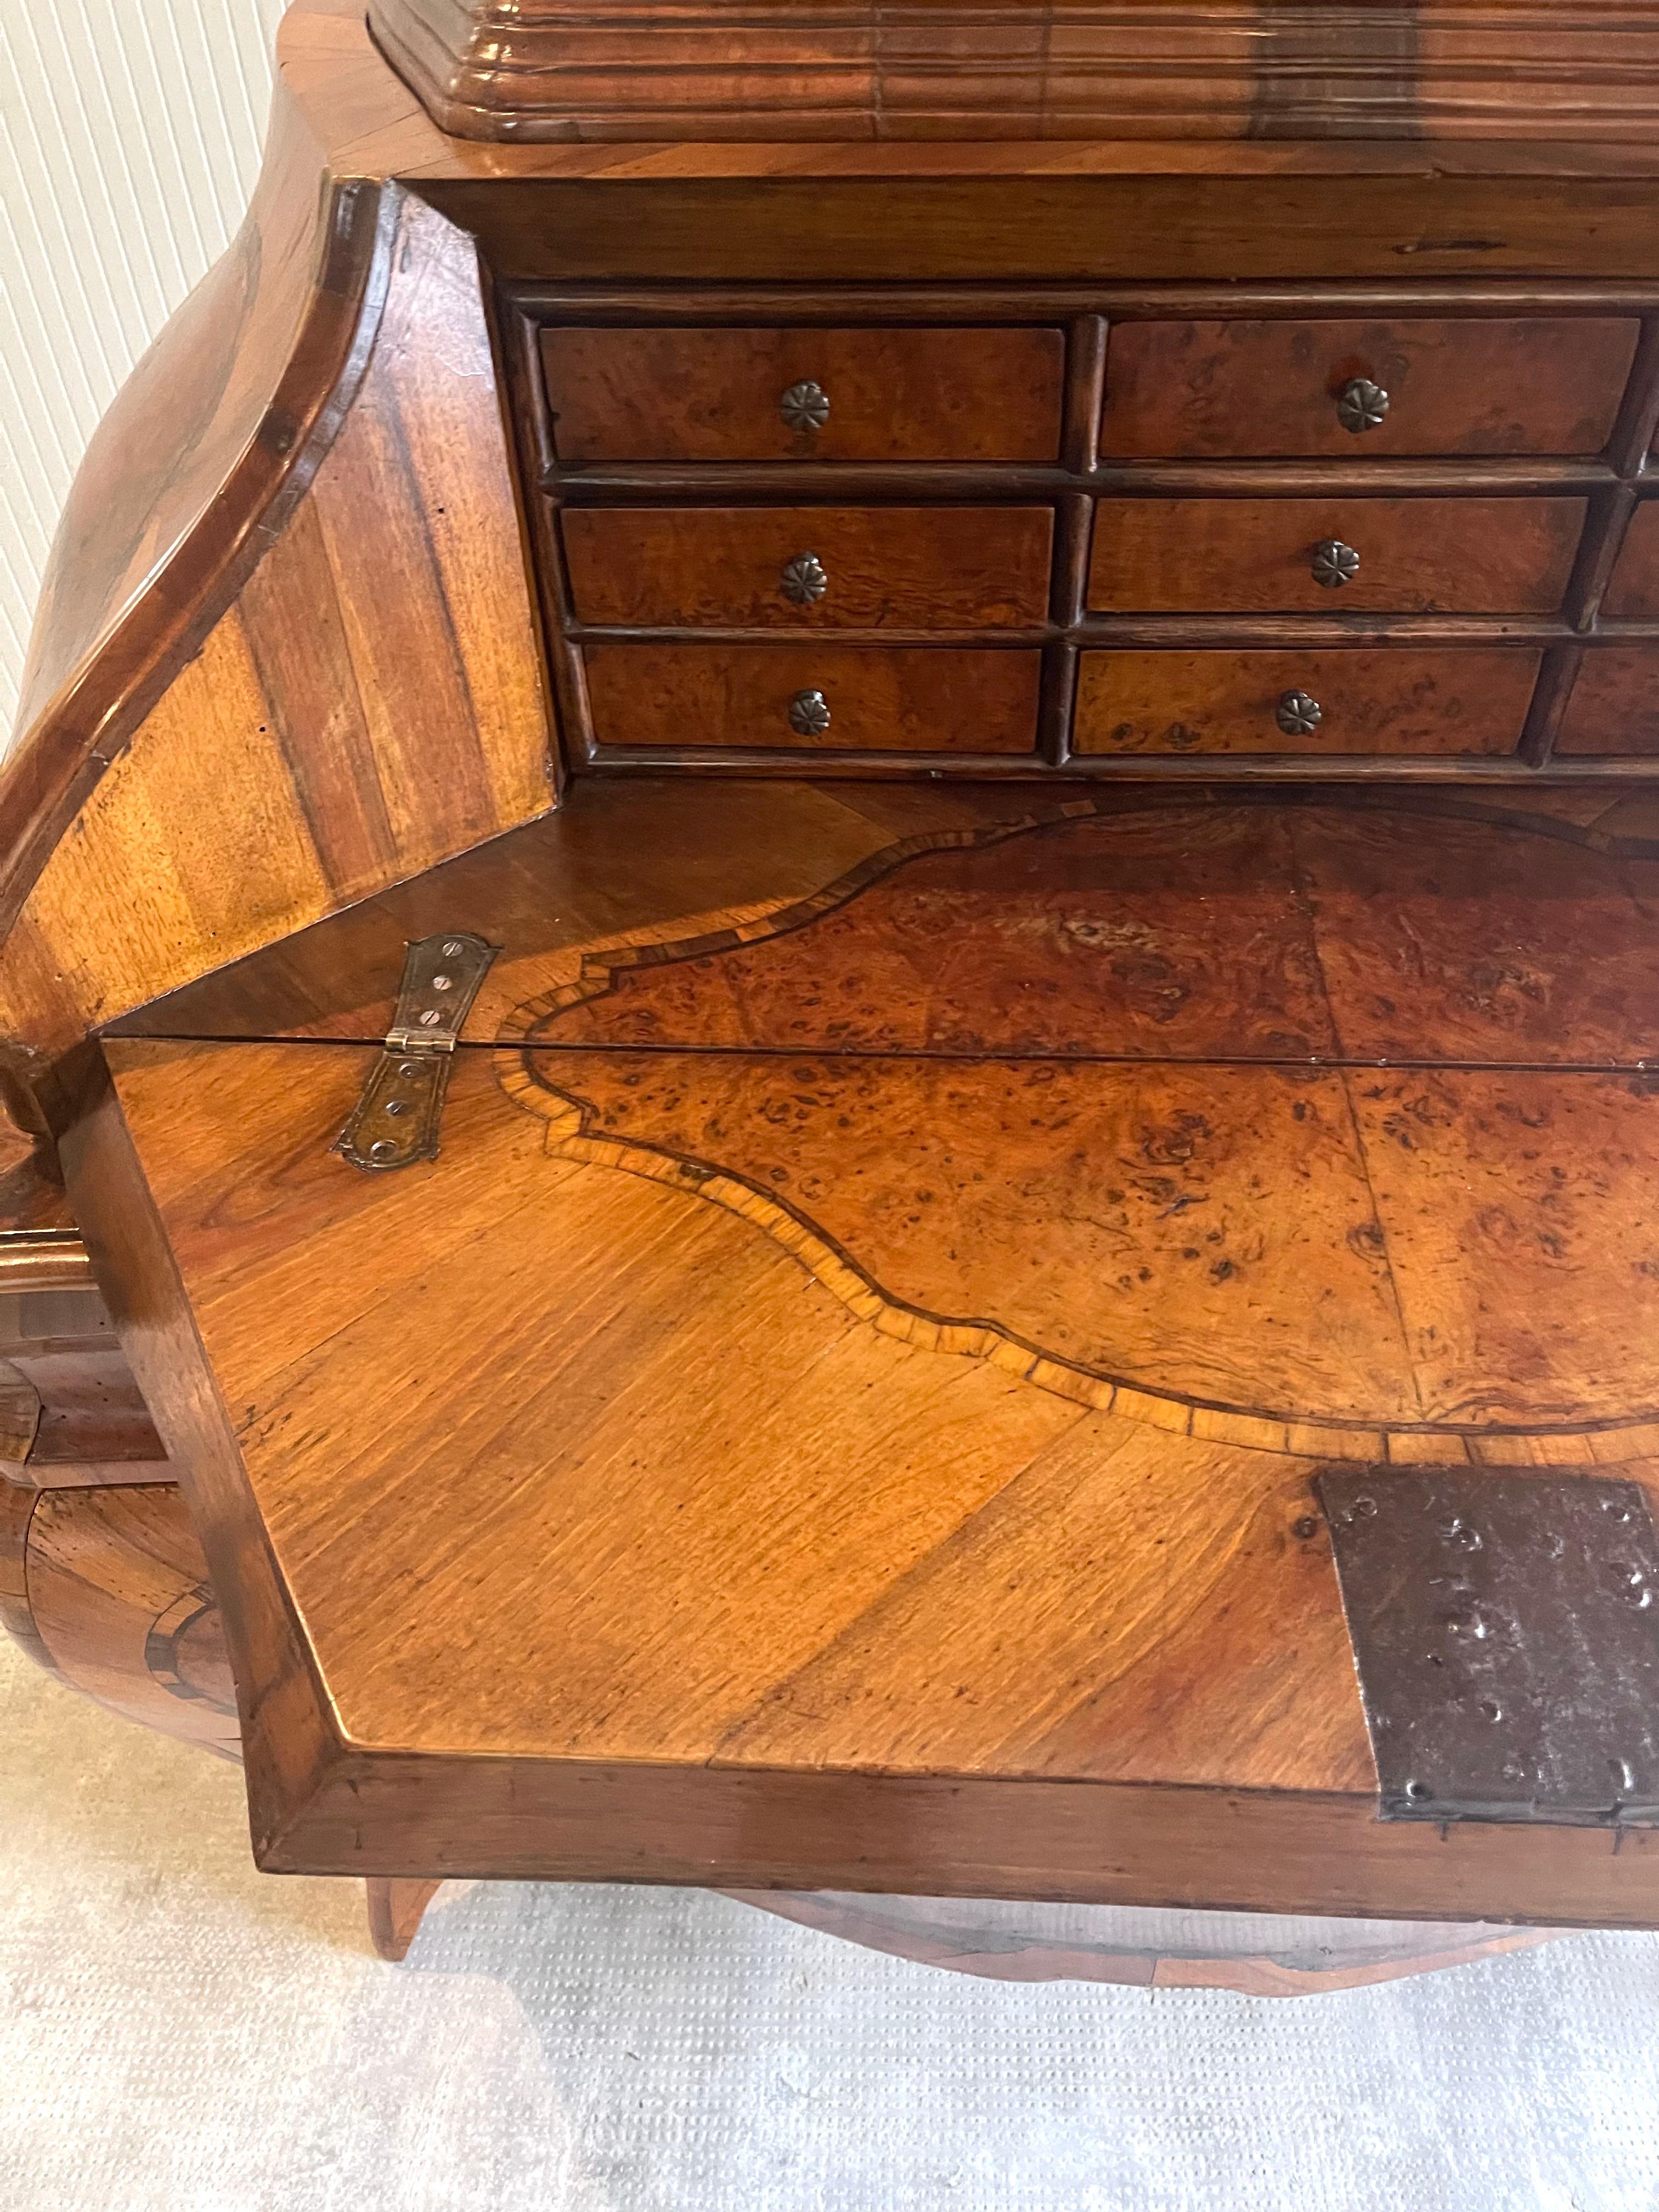 Veneer Trumeau Mid-19th Century, Northern Italy For Sale